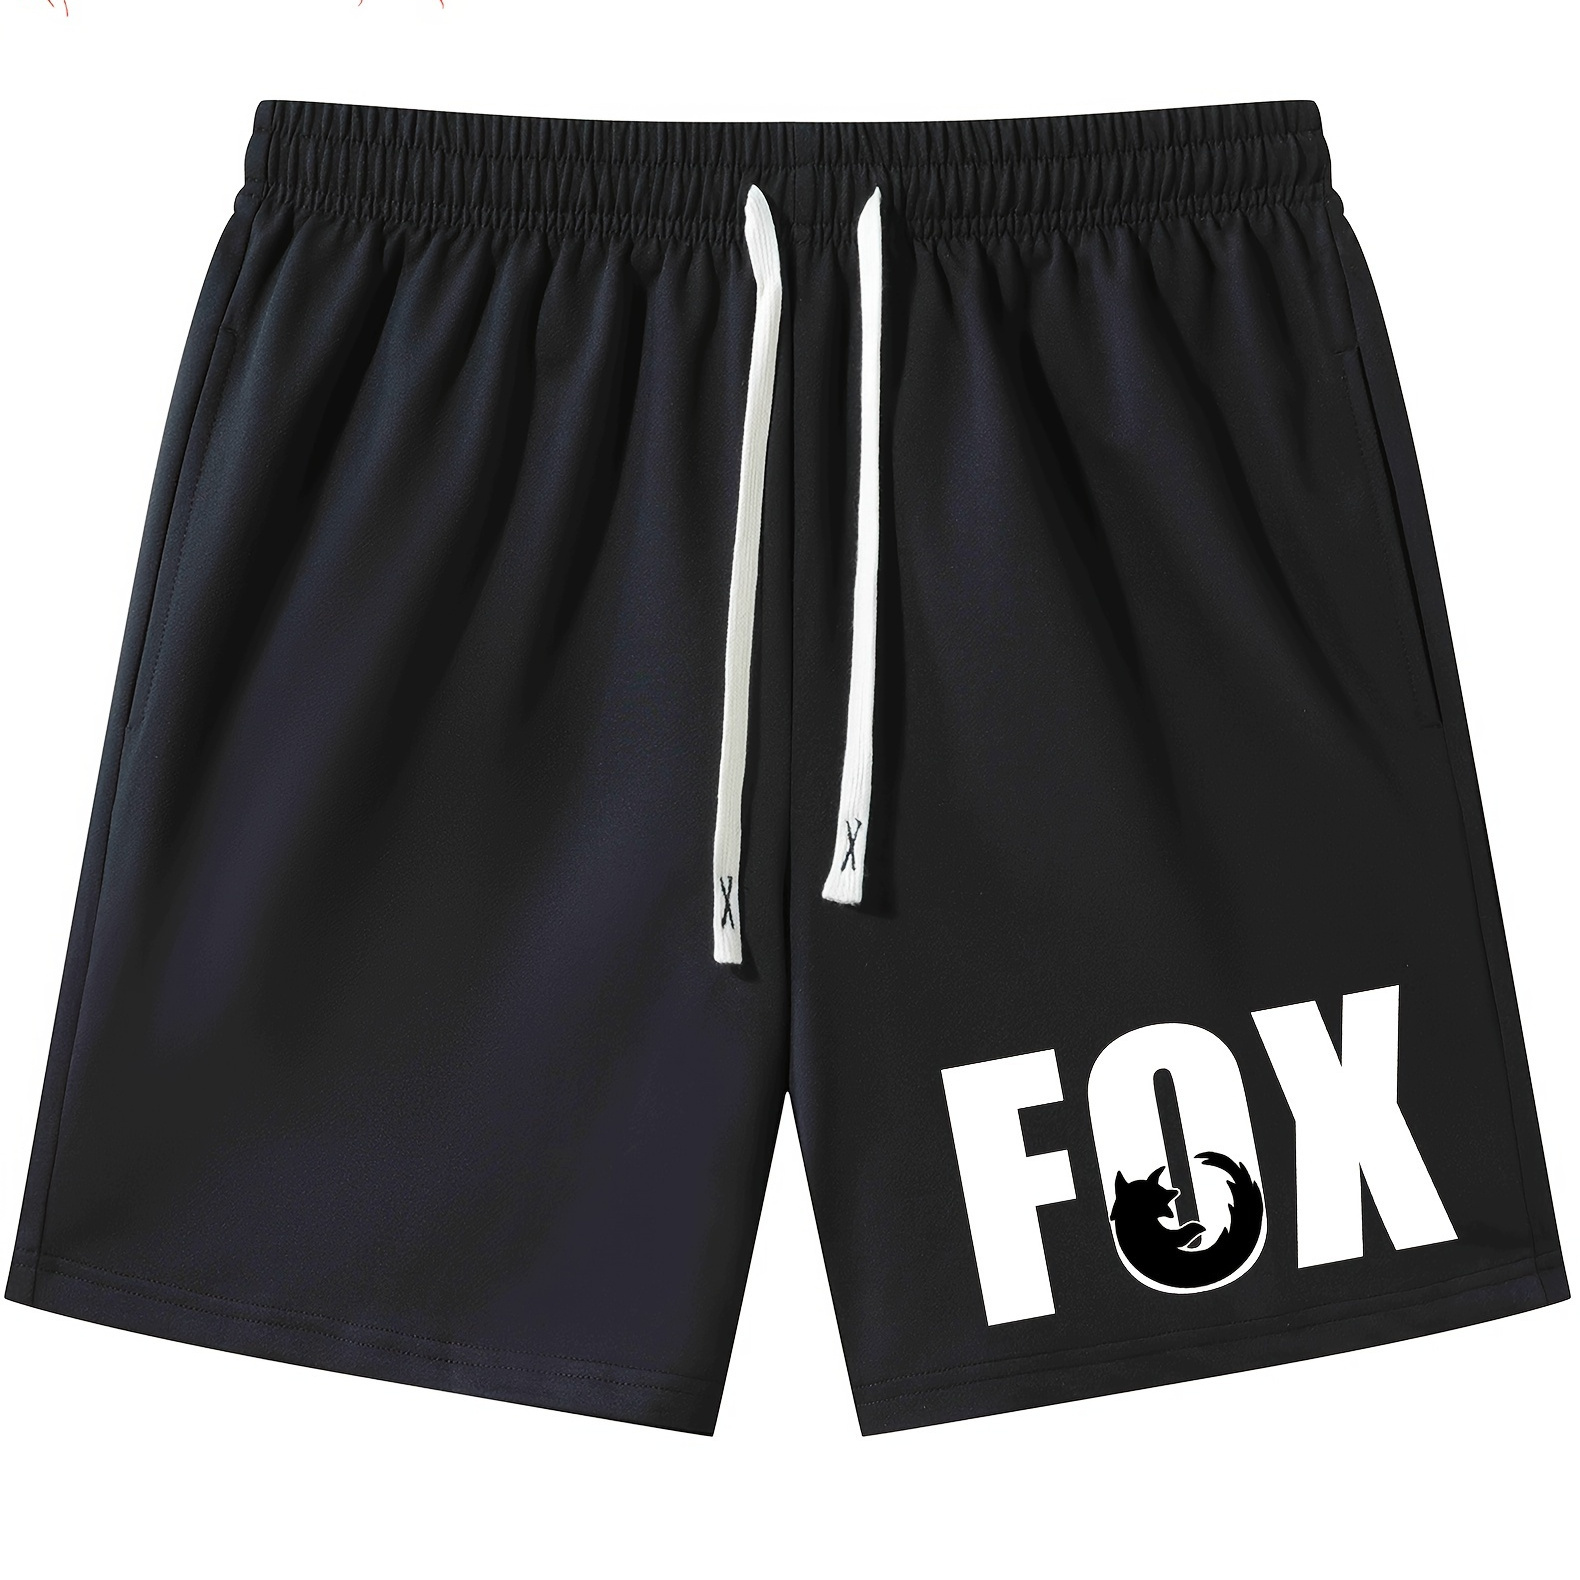 

Anime Fox Graphic Print, Men's Summer Comfy Shorts With Drawstrings, Casual Loose Clothing For Men, As Gifts, For Daily Leisure Loungewear Outdoors